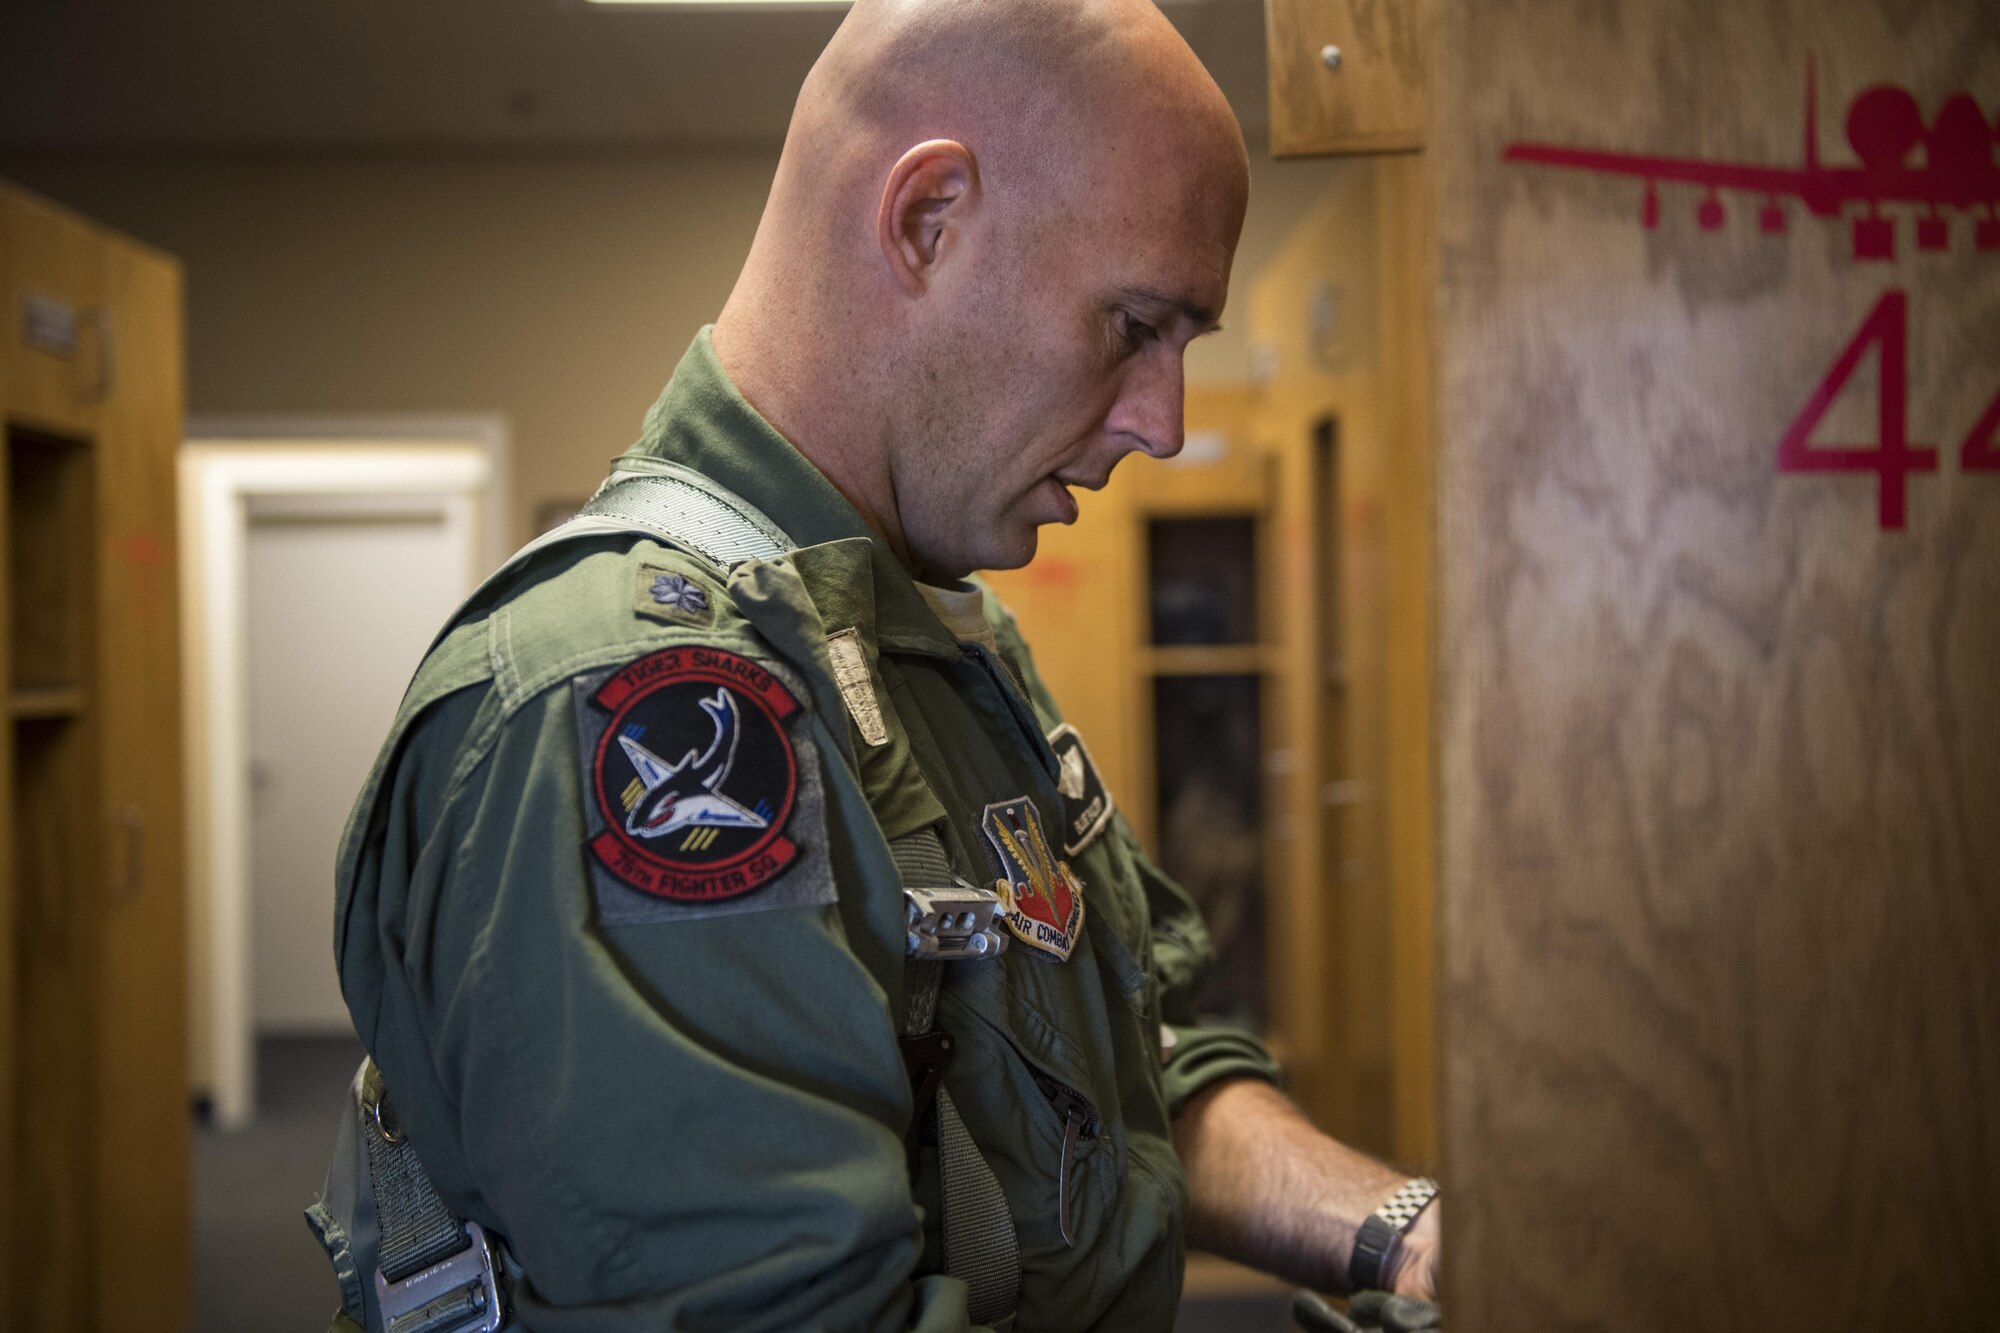 Lt. Col. Edward Balzer, 75th Fighter Squadron assistant director of operations, gathers his gear before departing for a flight, Oct. 31, 2017, at Moody Air Force Base, Ga. Pilots, traveled to Eglin AFB, Fla., to participate in exercise COMBAT HAMMER. The exercise evaluates the effectiveness, maintainability, suitability and accuracy of precision guided munitions and high technology air to ground munitions from tactical deliveries against realistic targets with realistic enemy defenses. Moody’s team will be assessed and trained on how accurately and quickly a munition is built, loaded onto the aircraft and dropped from the aircraft onto a target. (U.S. Air Force photo by Senior Airman Janiqua P. Robinson)